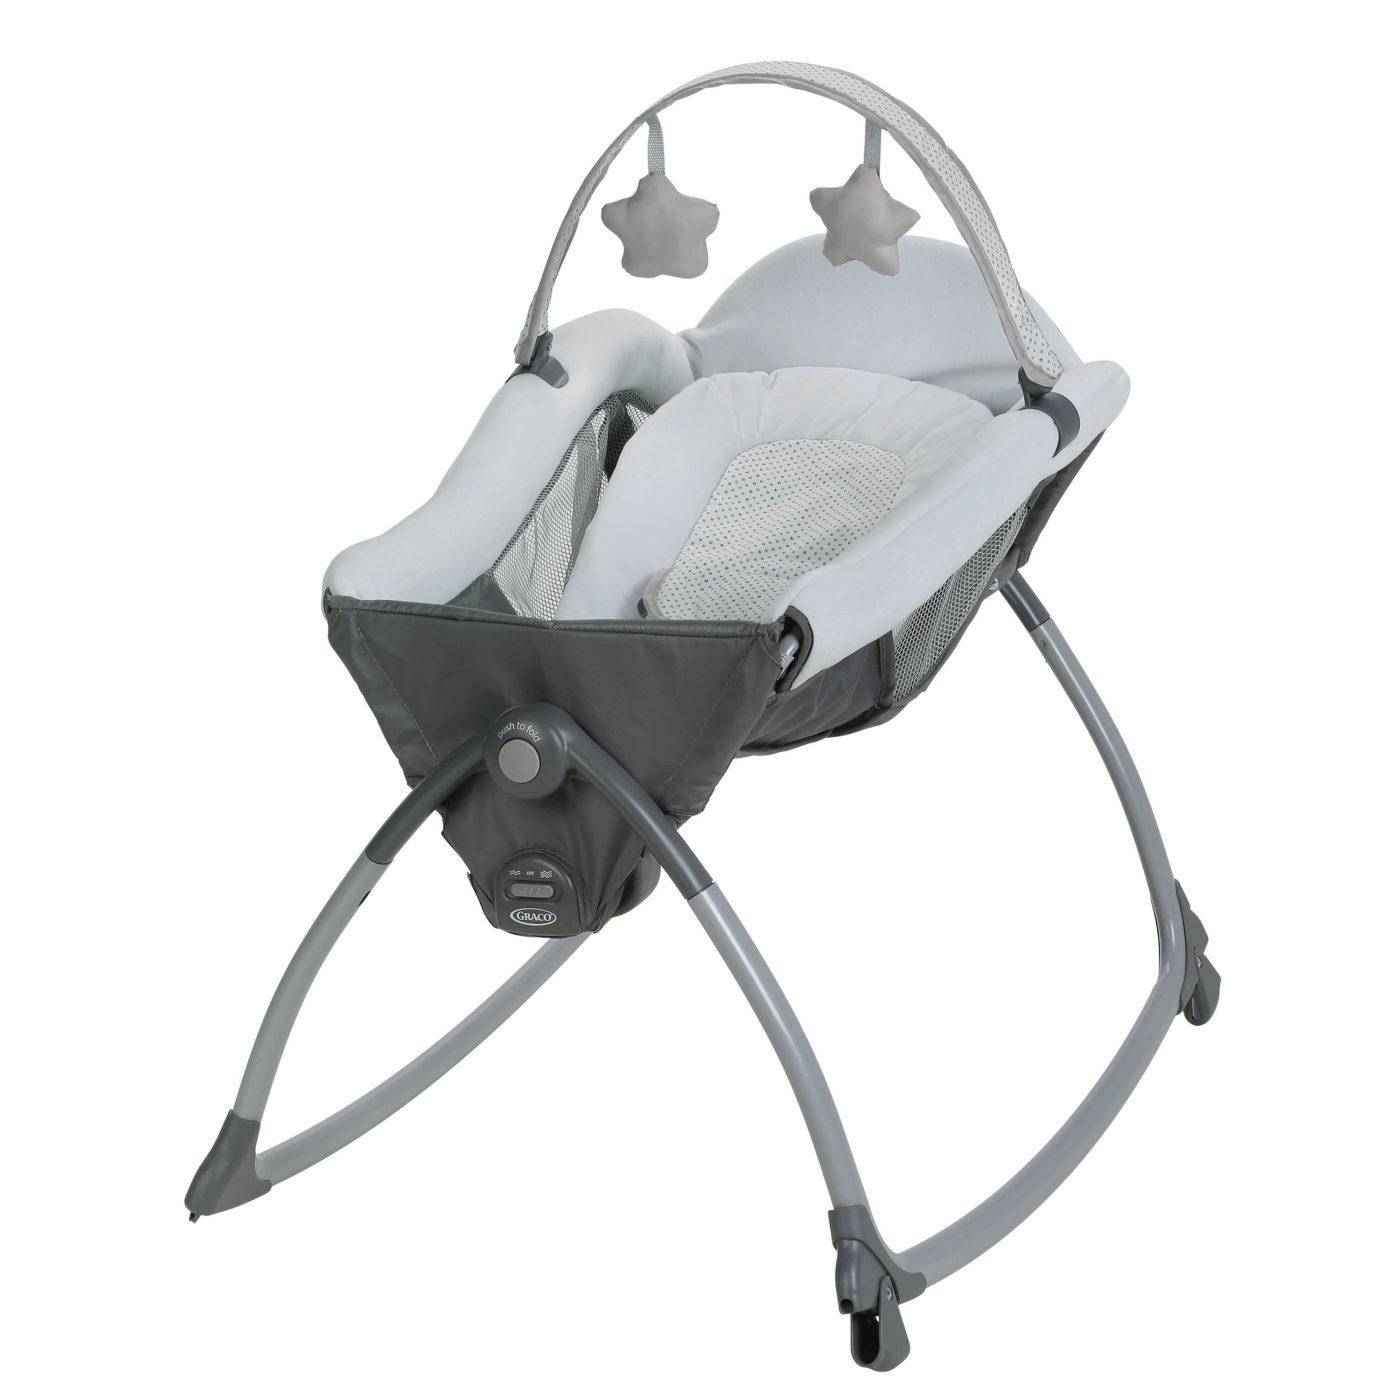 Graco Little Lounger Rocking Seat Recall Lawsuit & Lawyer [2020 Recall]